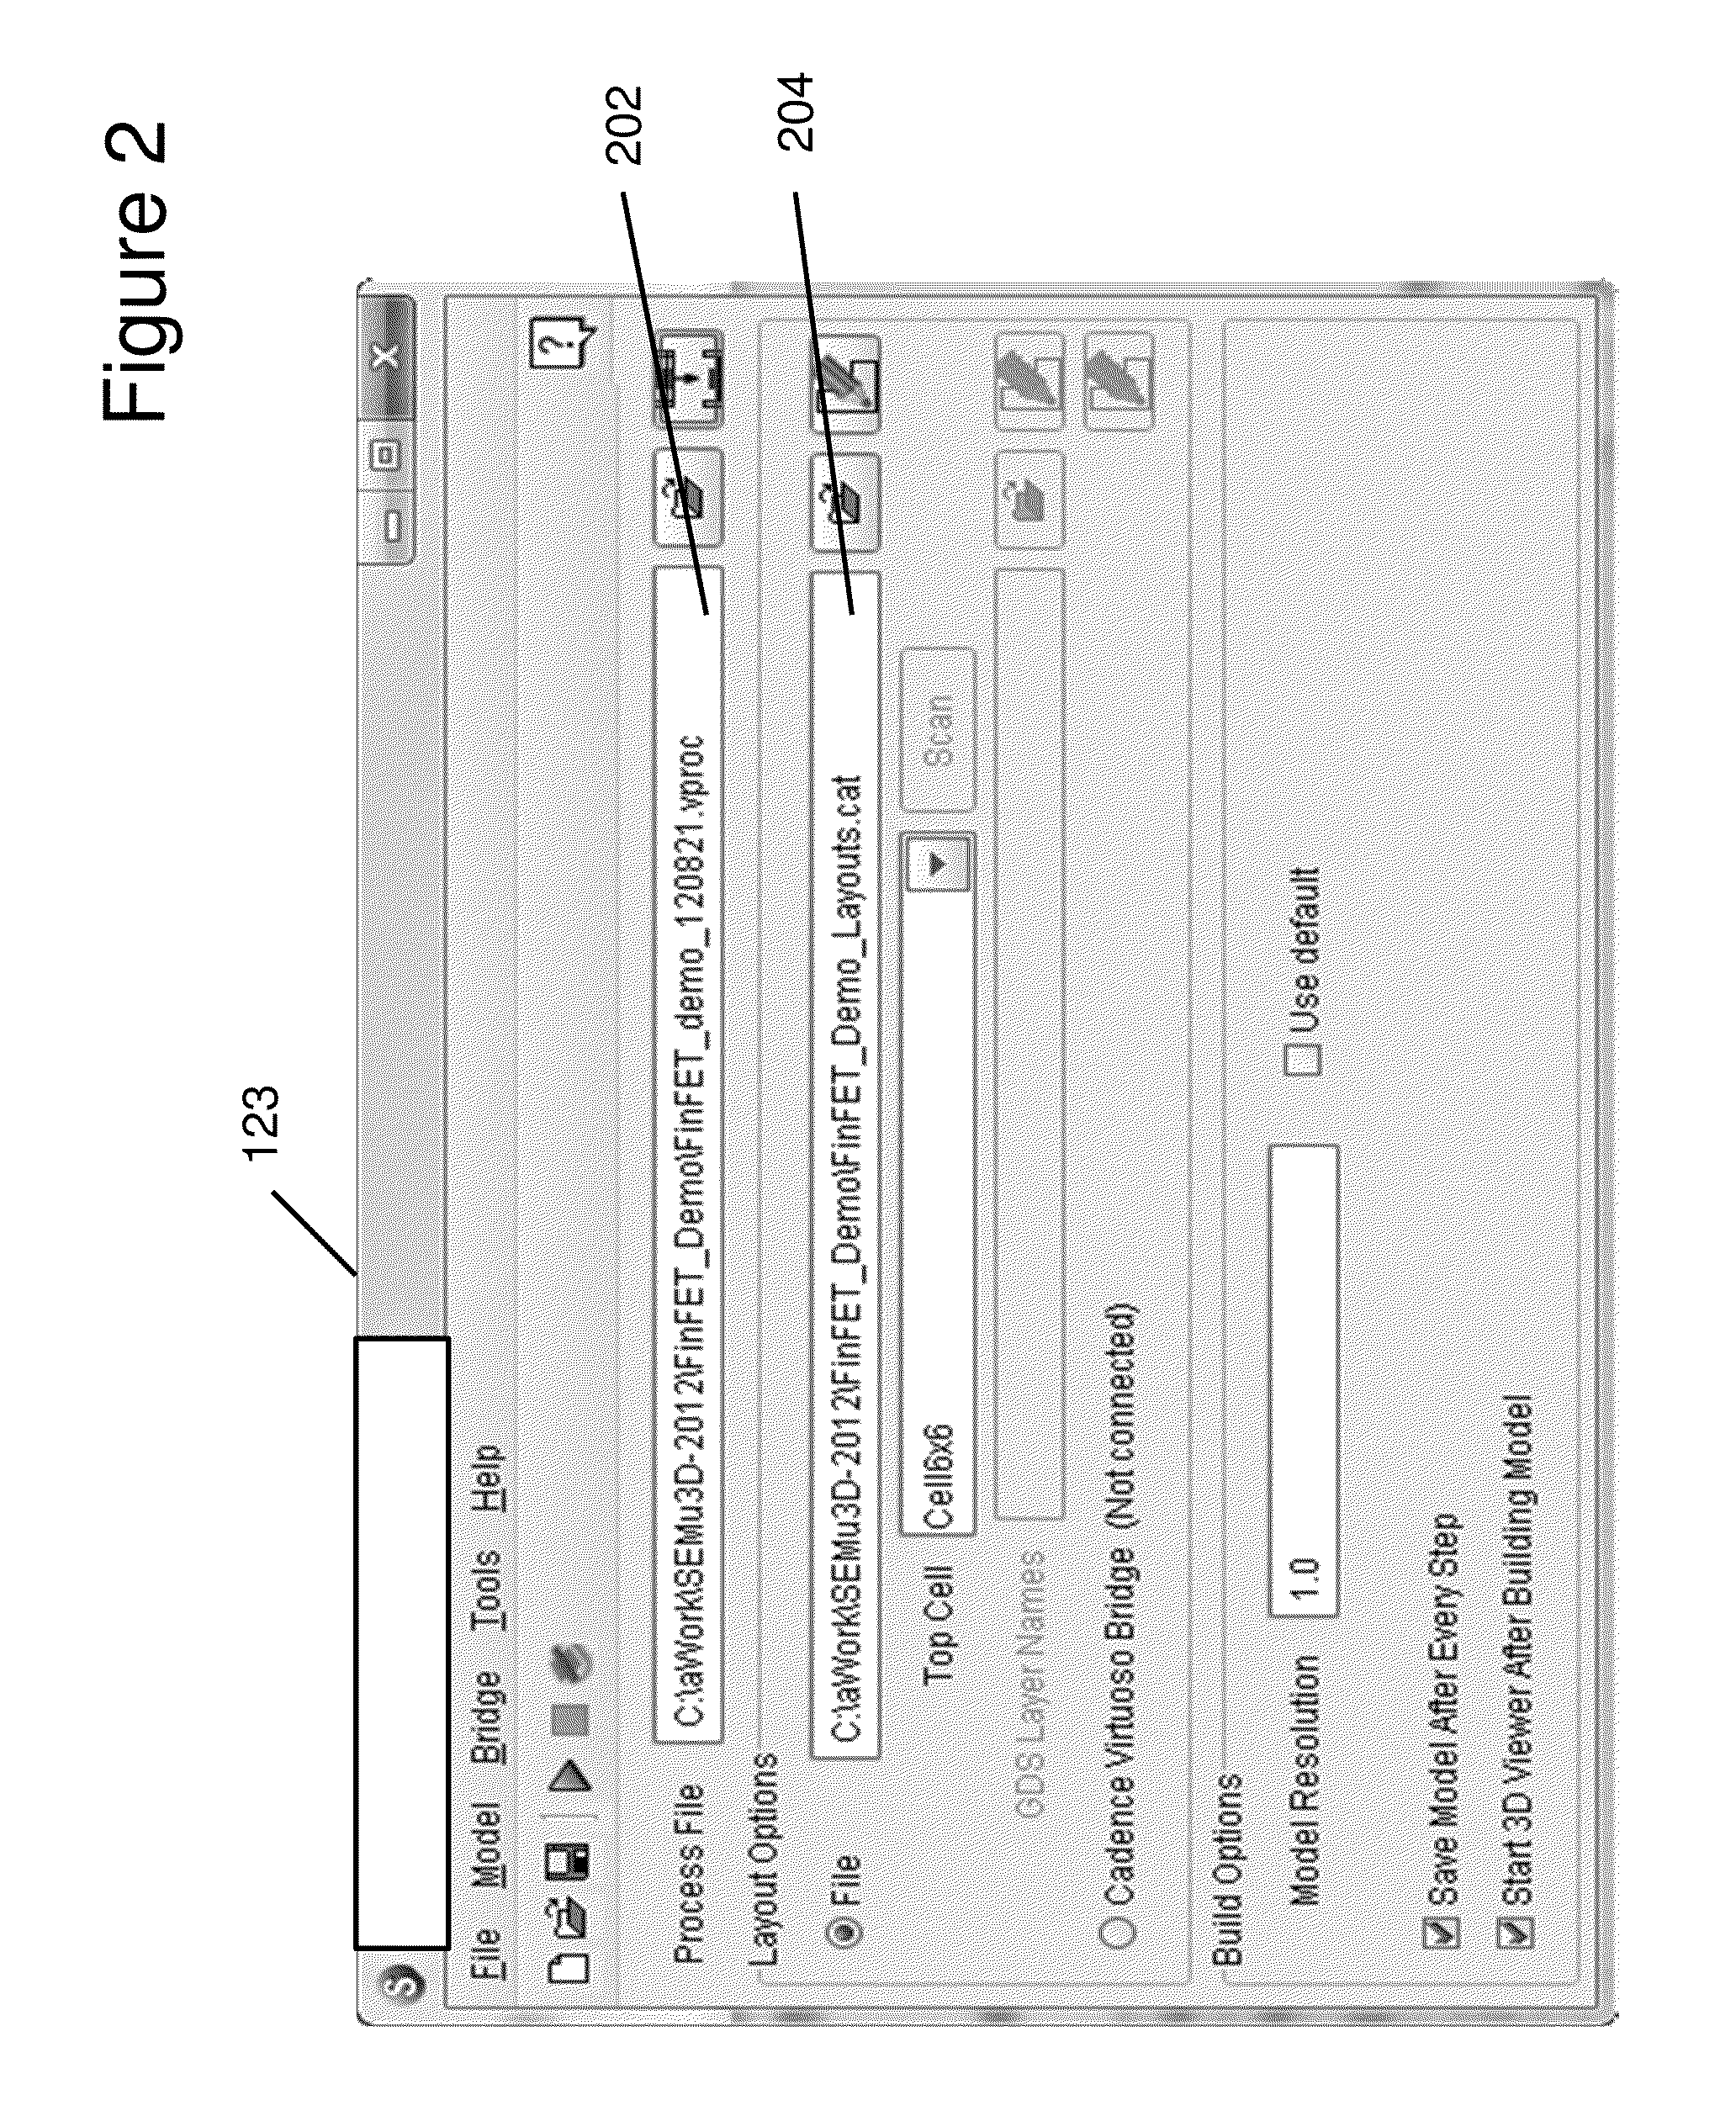 System and method for performing directed self-assembly in a 3-d virtual fabrication environment